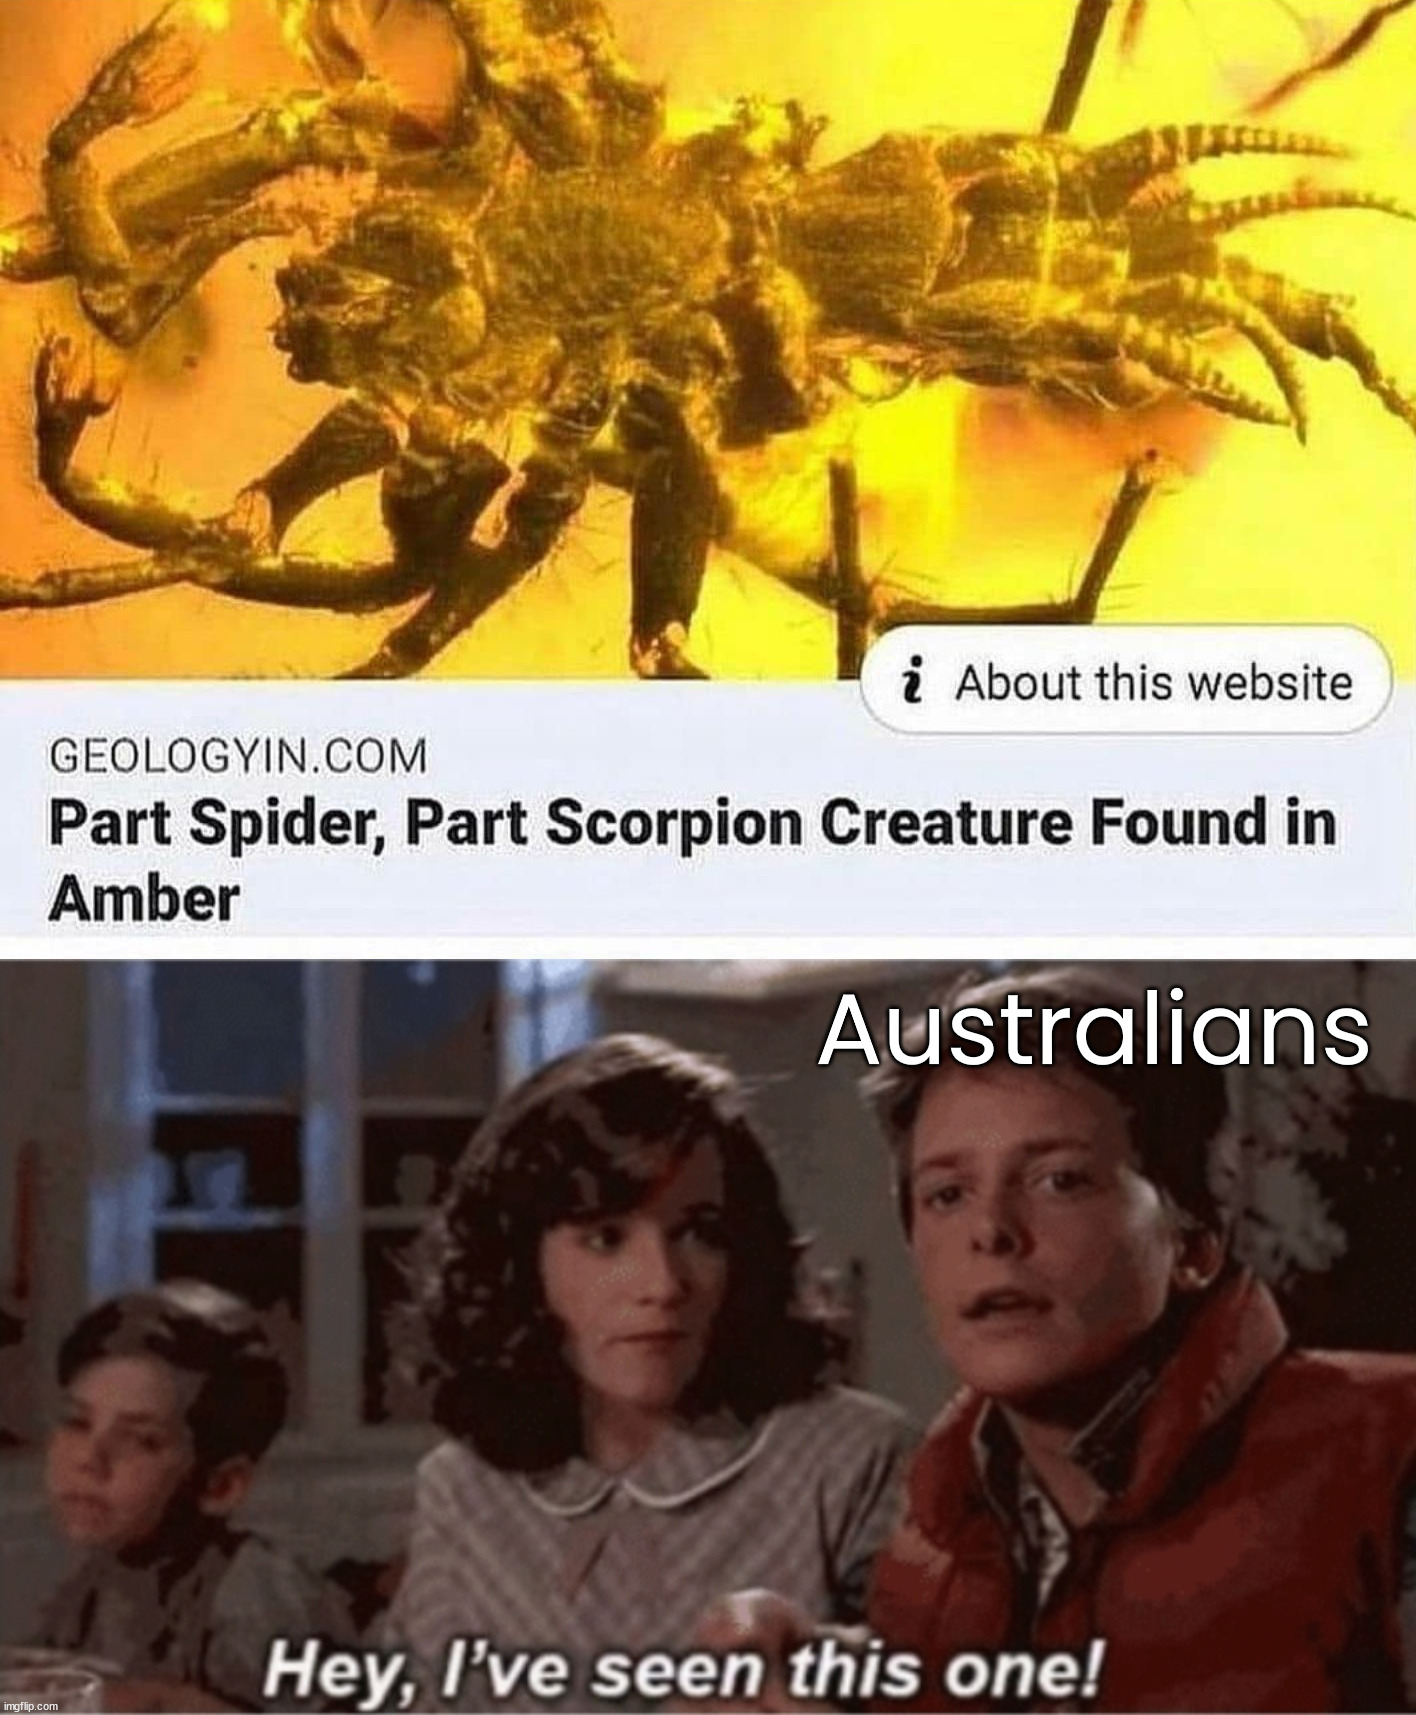 I am sure it discovered down under | Australians | image tagged in hey i've seen this one,australia,freak out,insect,spider | made w/ Imgflip meme maker